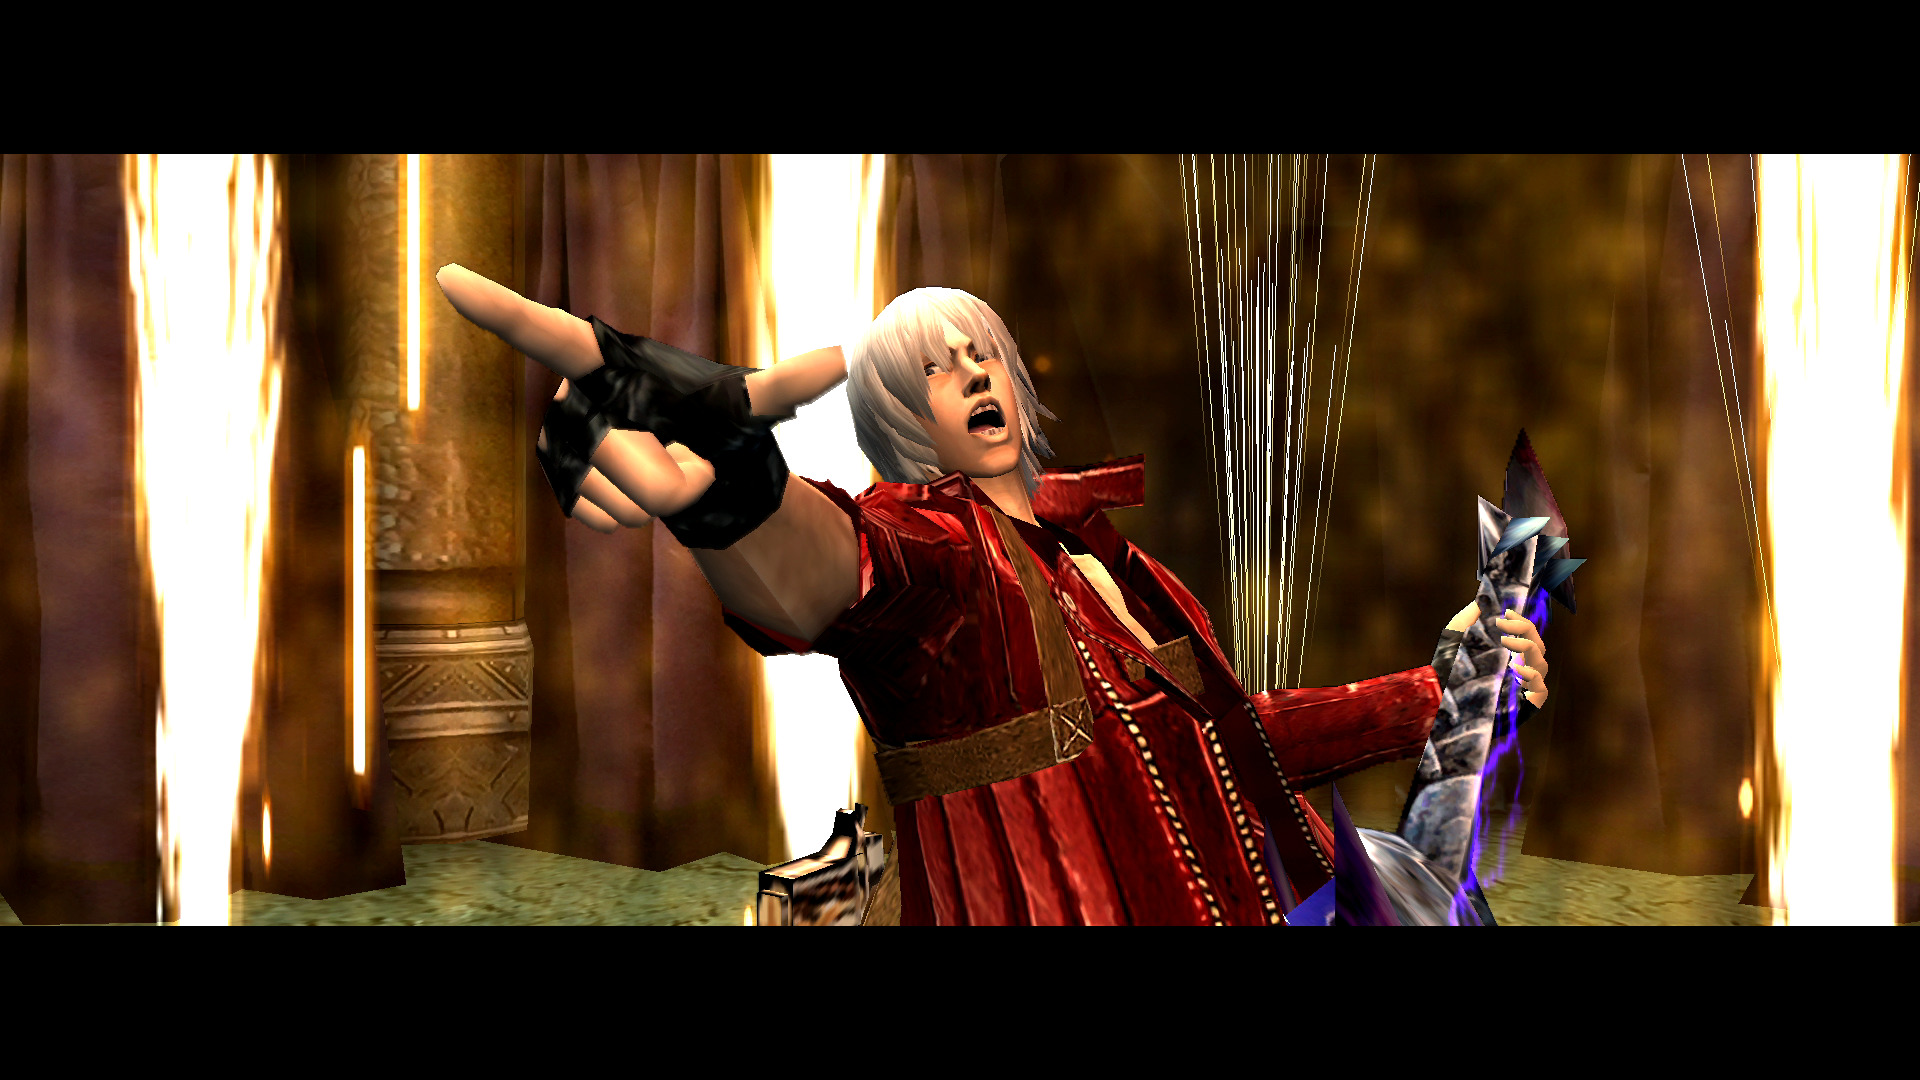 devil may cry nintendo switch